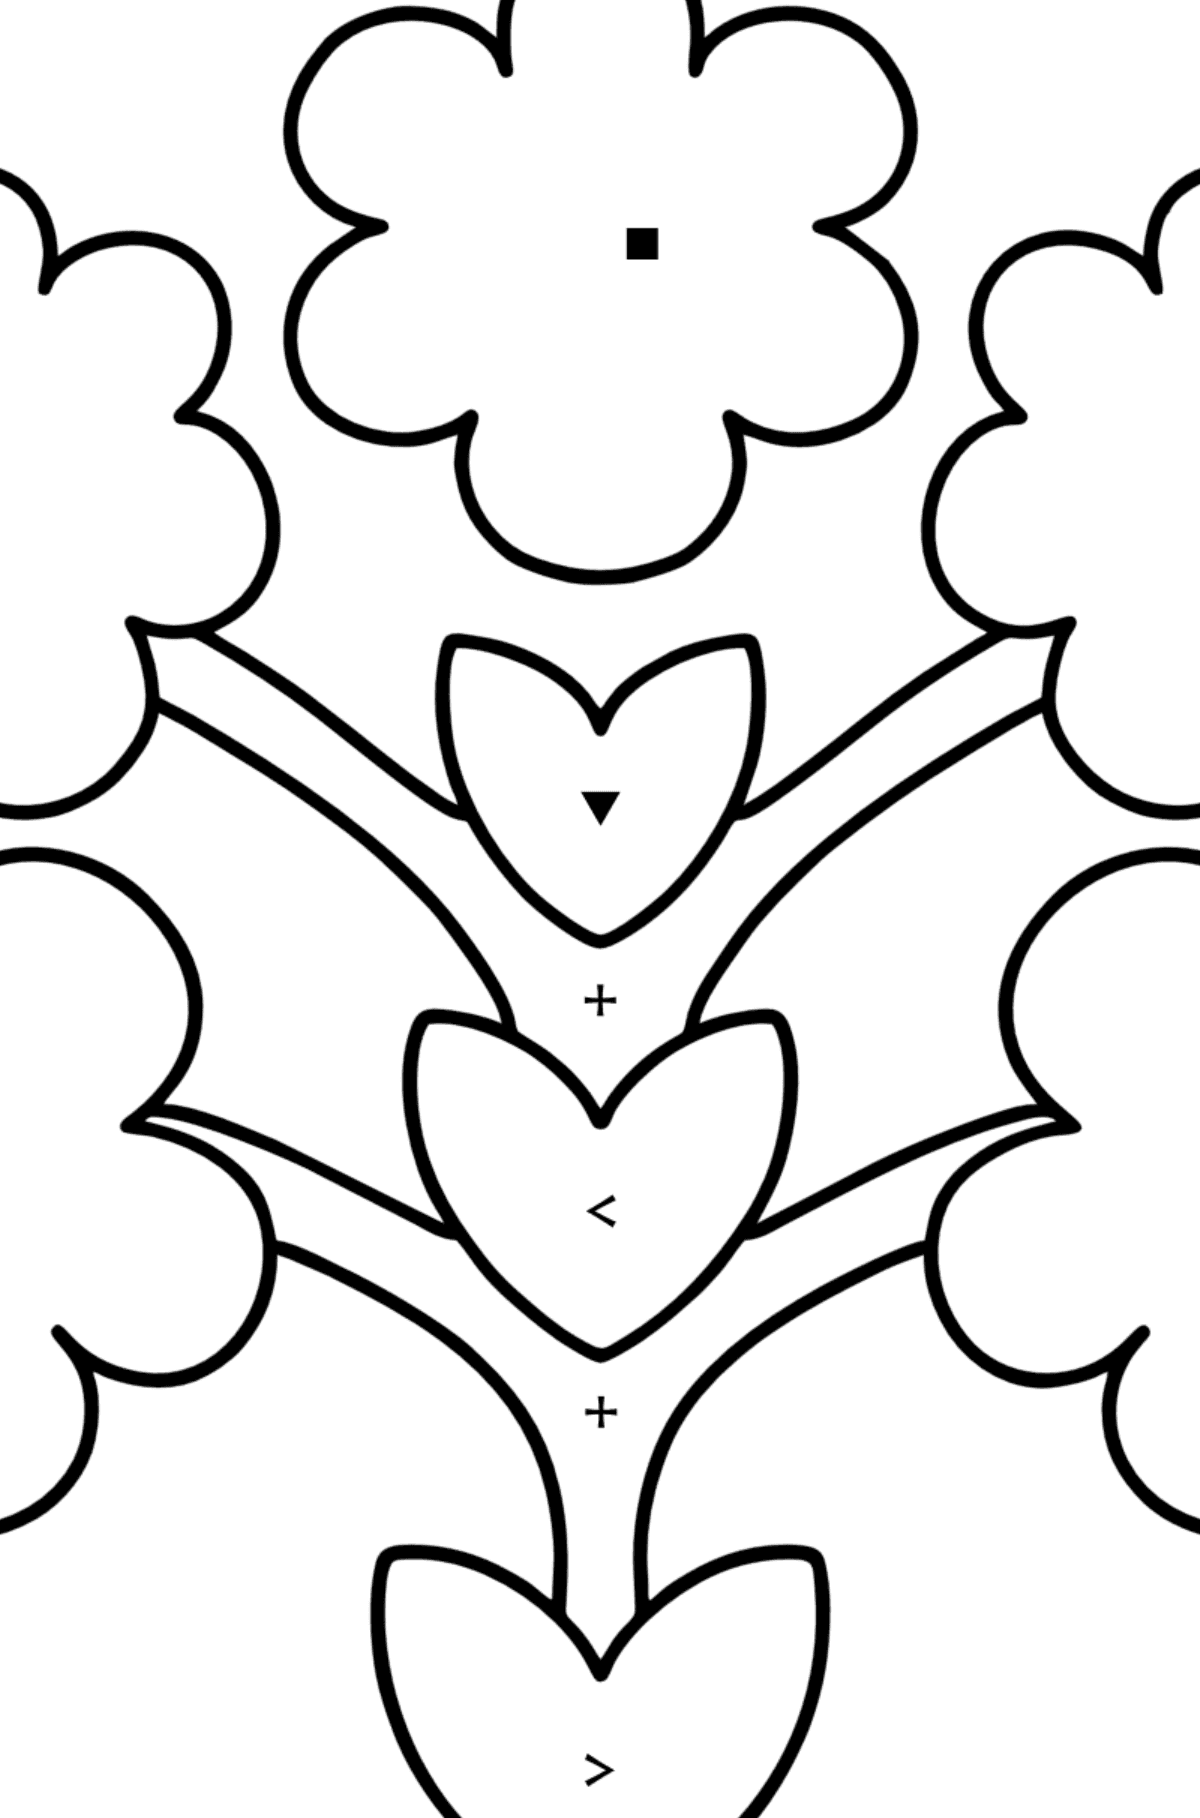 Zentangle Art flower coloring pages for kids - Coloring by Symbols for Kids